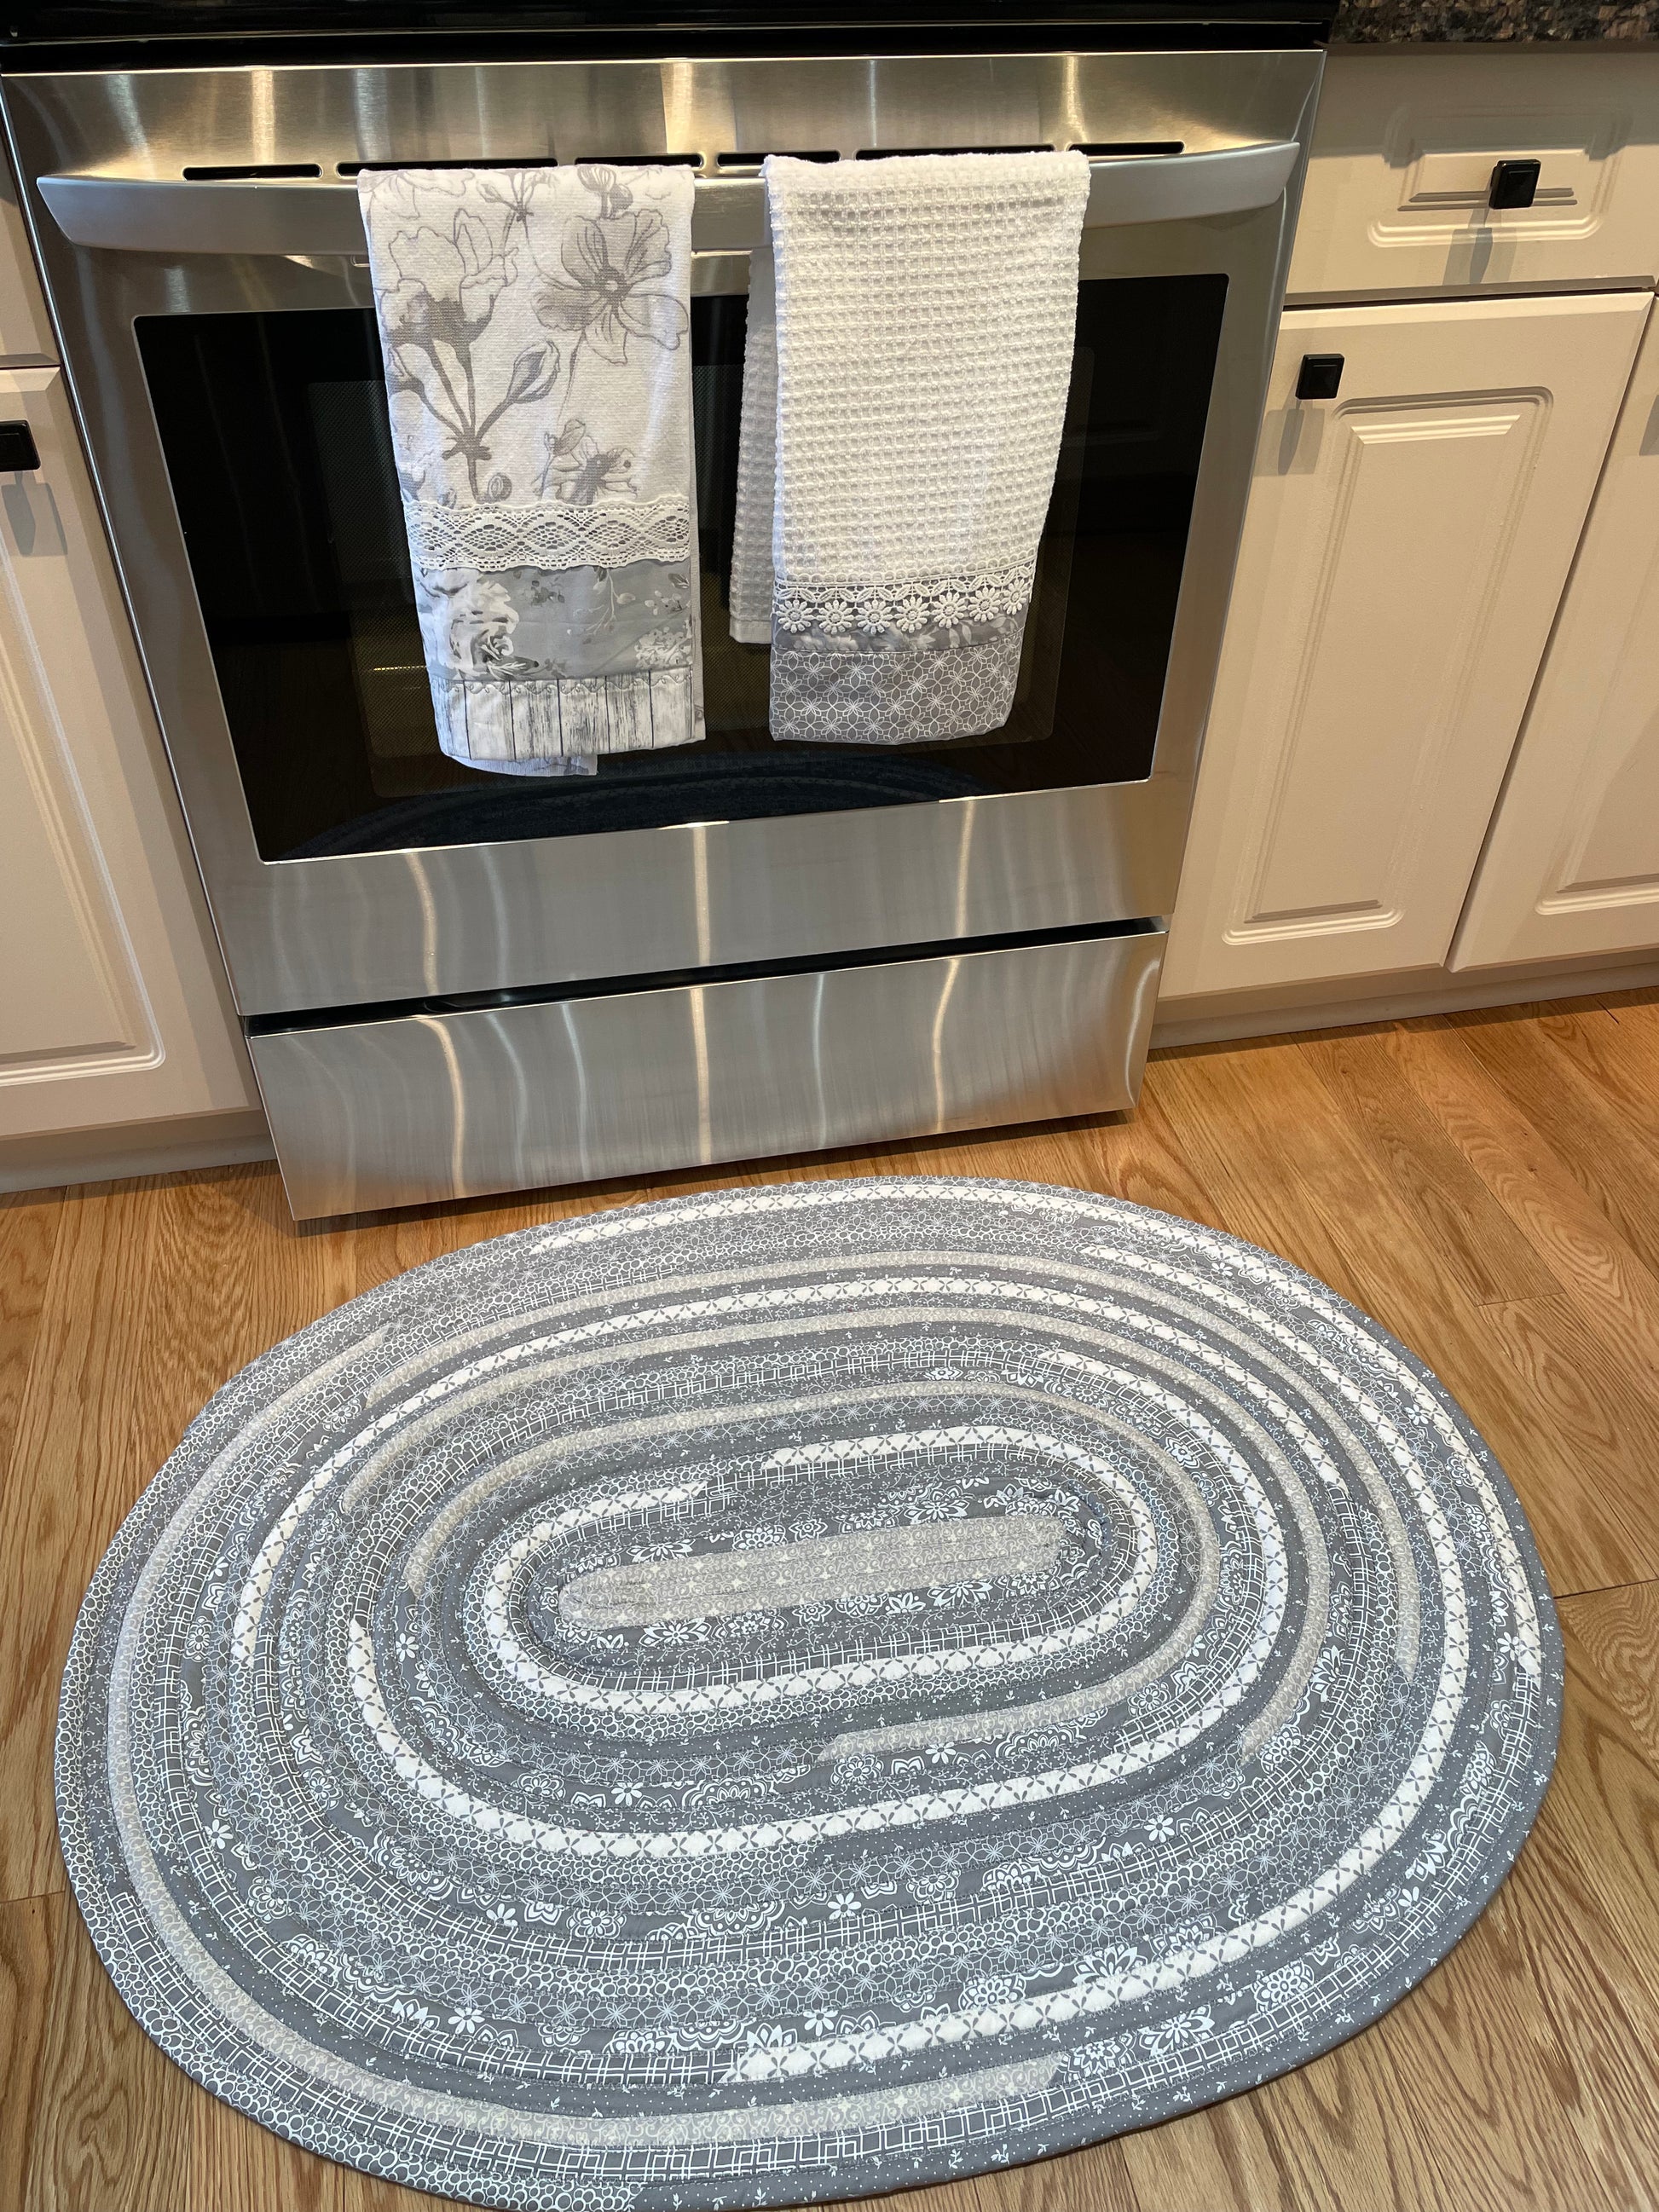 Grey and White Modern Farmhouse Kitchen Accent Rug. Can be used as a luxury bathmat, or bedside rug.  Washable, Cotton and made in Canada with globally sourced supplies.  Matching dish towels and shower curtains also available.  Check out the Home Stitchery Decor YouTube Channel. 